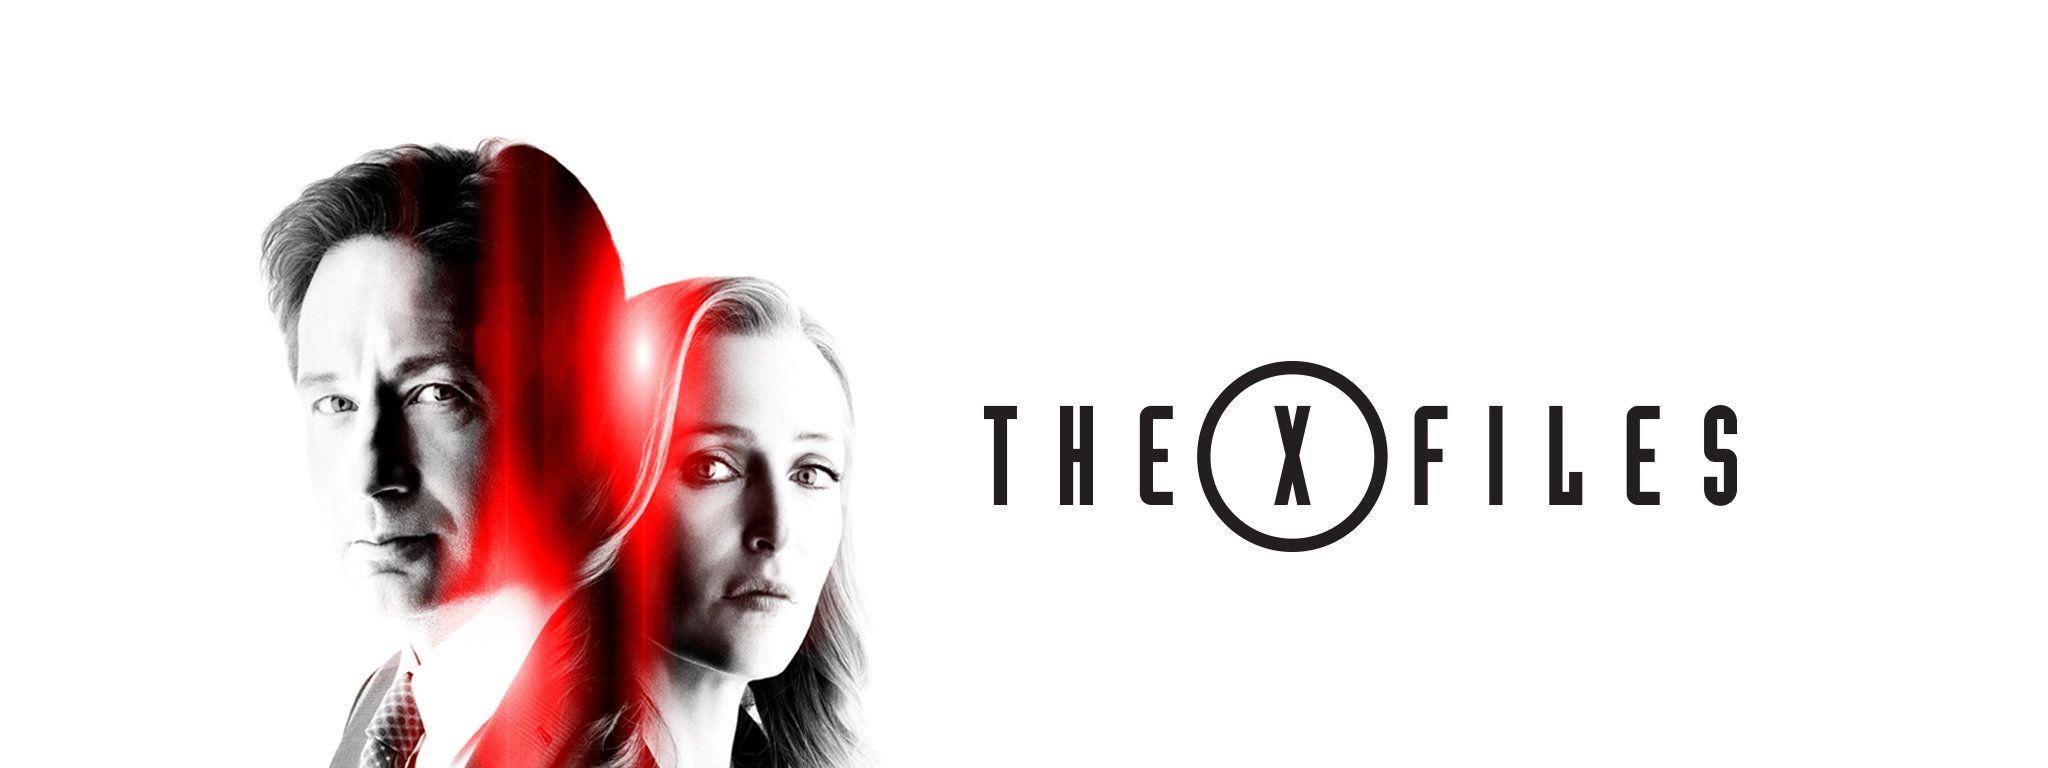 X-Files Logo - Watch The X-Files Free Online | Yahoo View